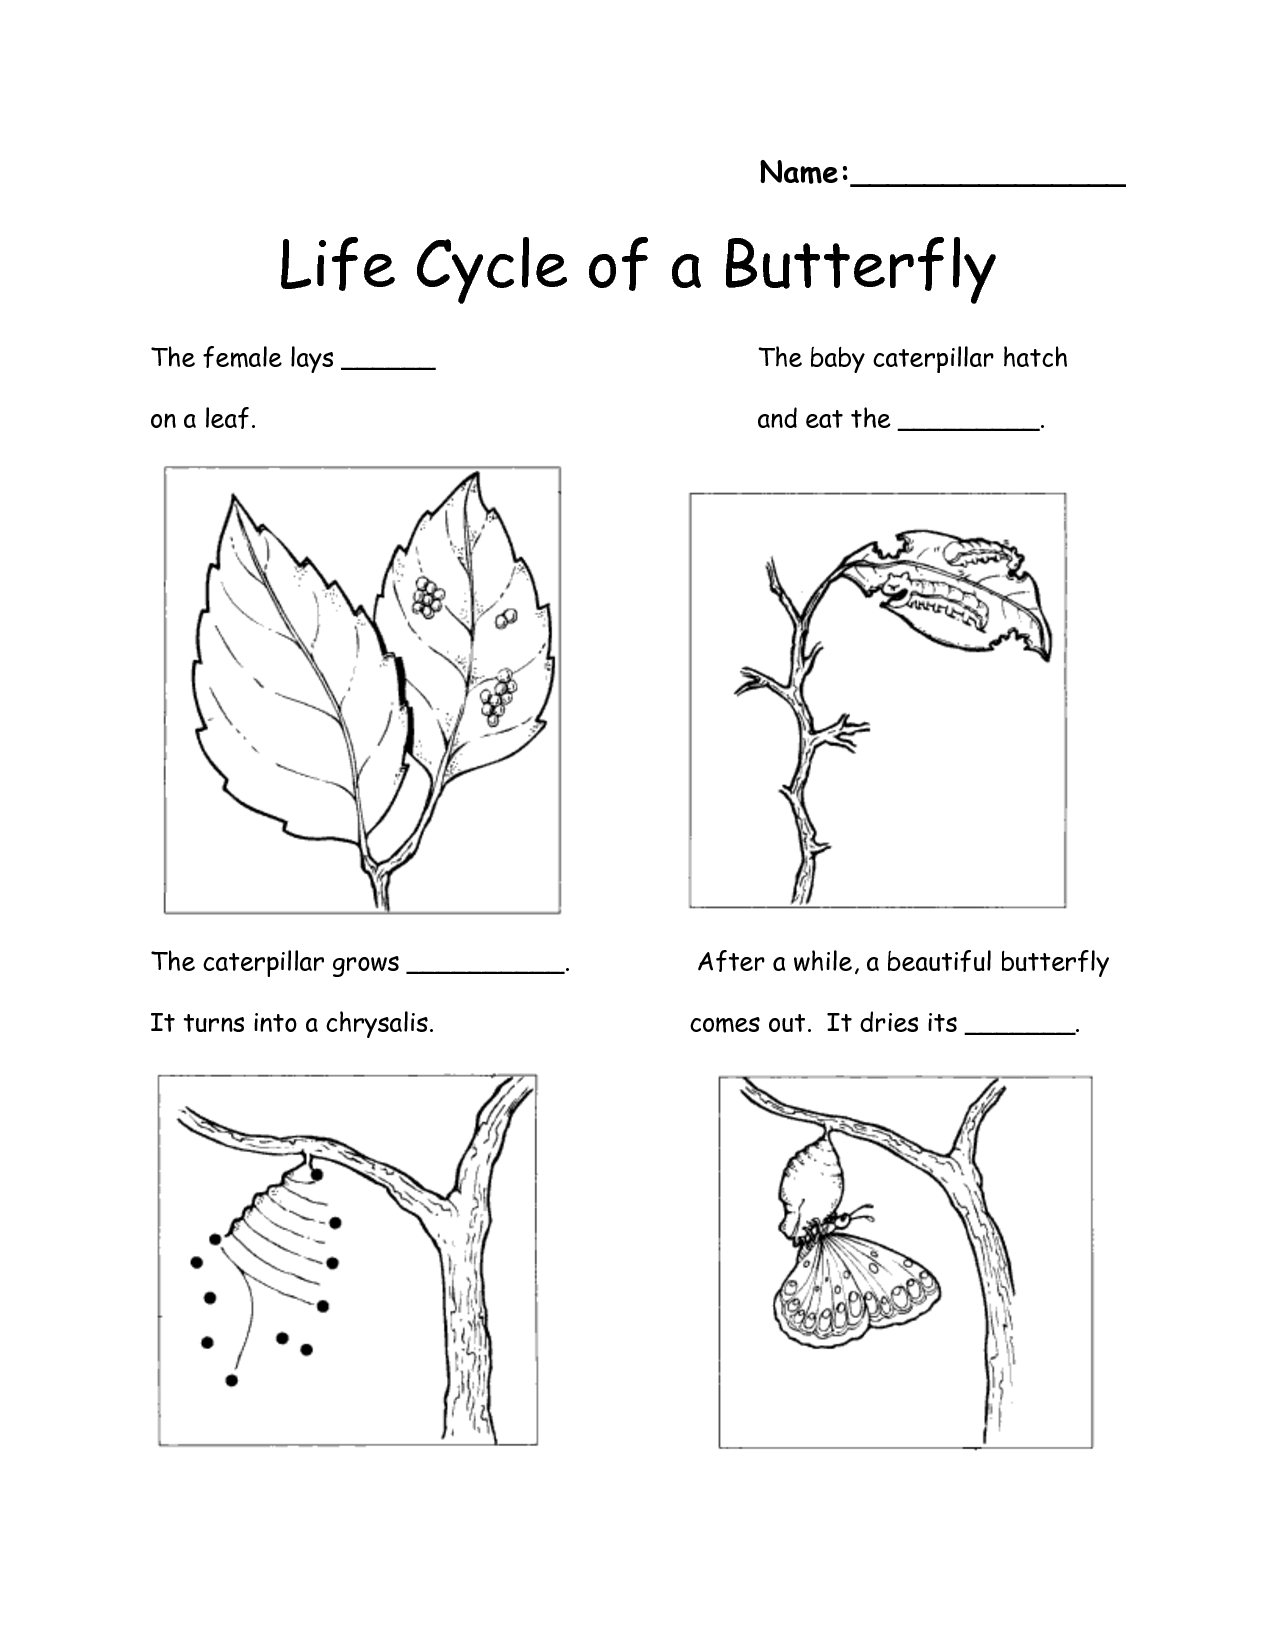 Butterfly Life Cycle Worksheet Image